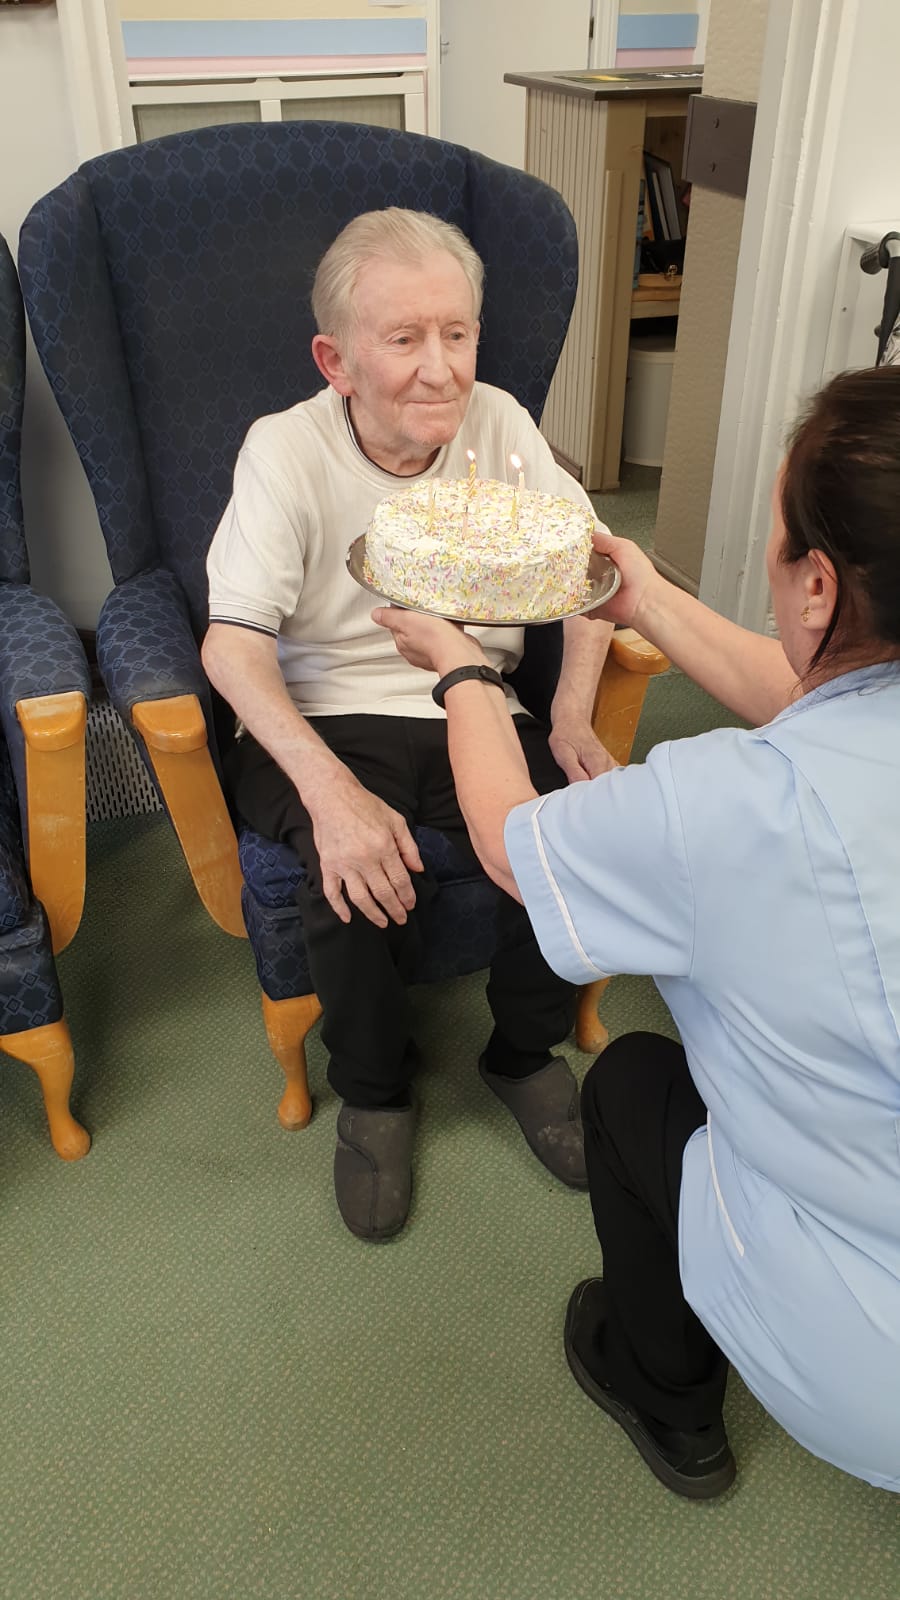 Tea Dance with Birthday Cake at Victoria House Care Centre: Key Healthcare is dedicated to caring for elderly residents in safe. We have multiple dementia care homes including our care home middlesbrough, our care home St. Helen and care home saltburn. We excel in monitoring and improving care levels.